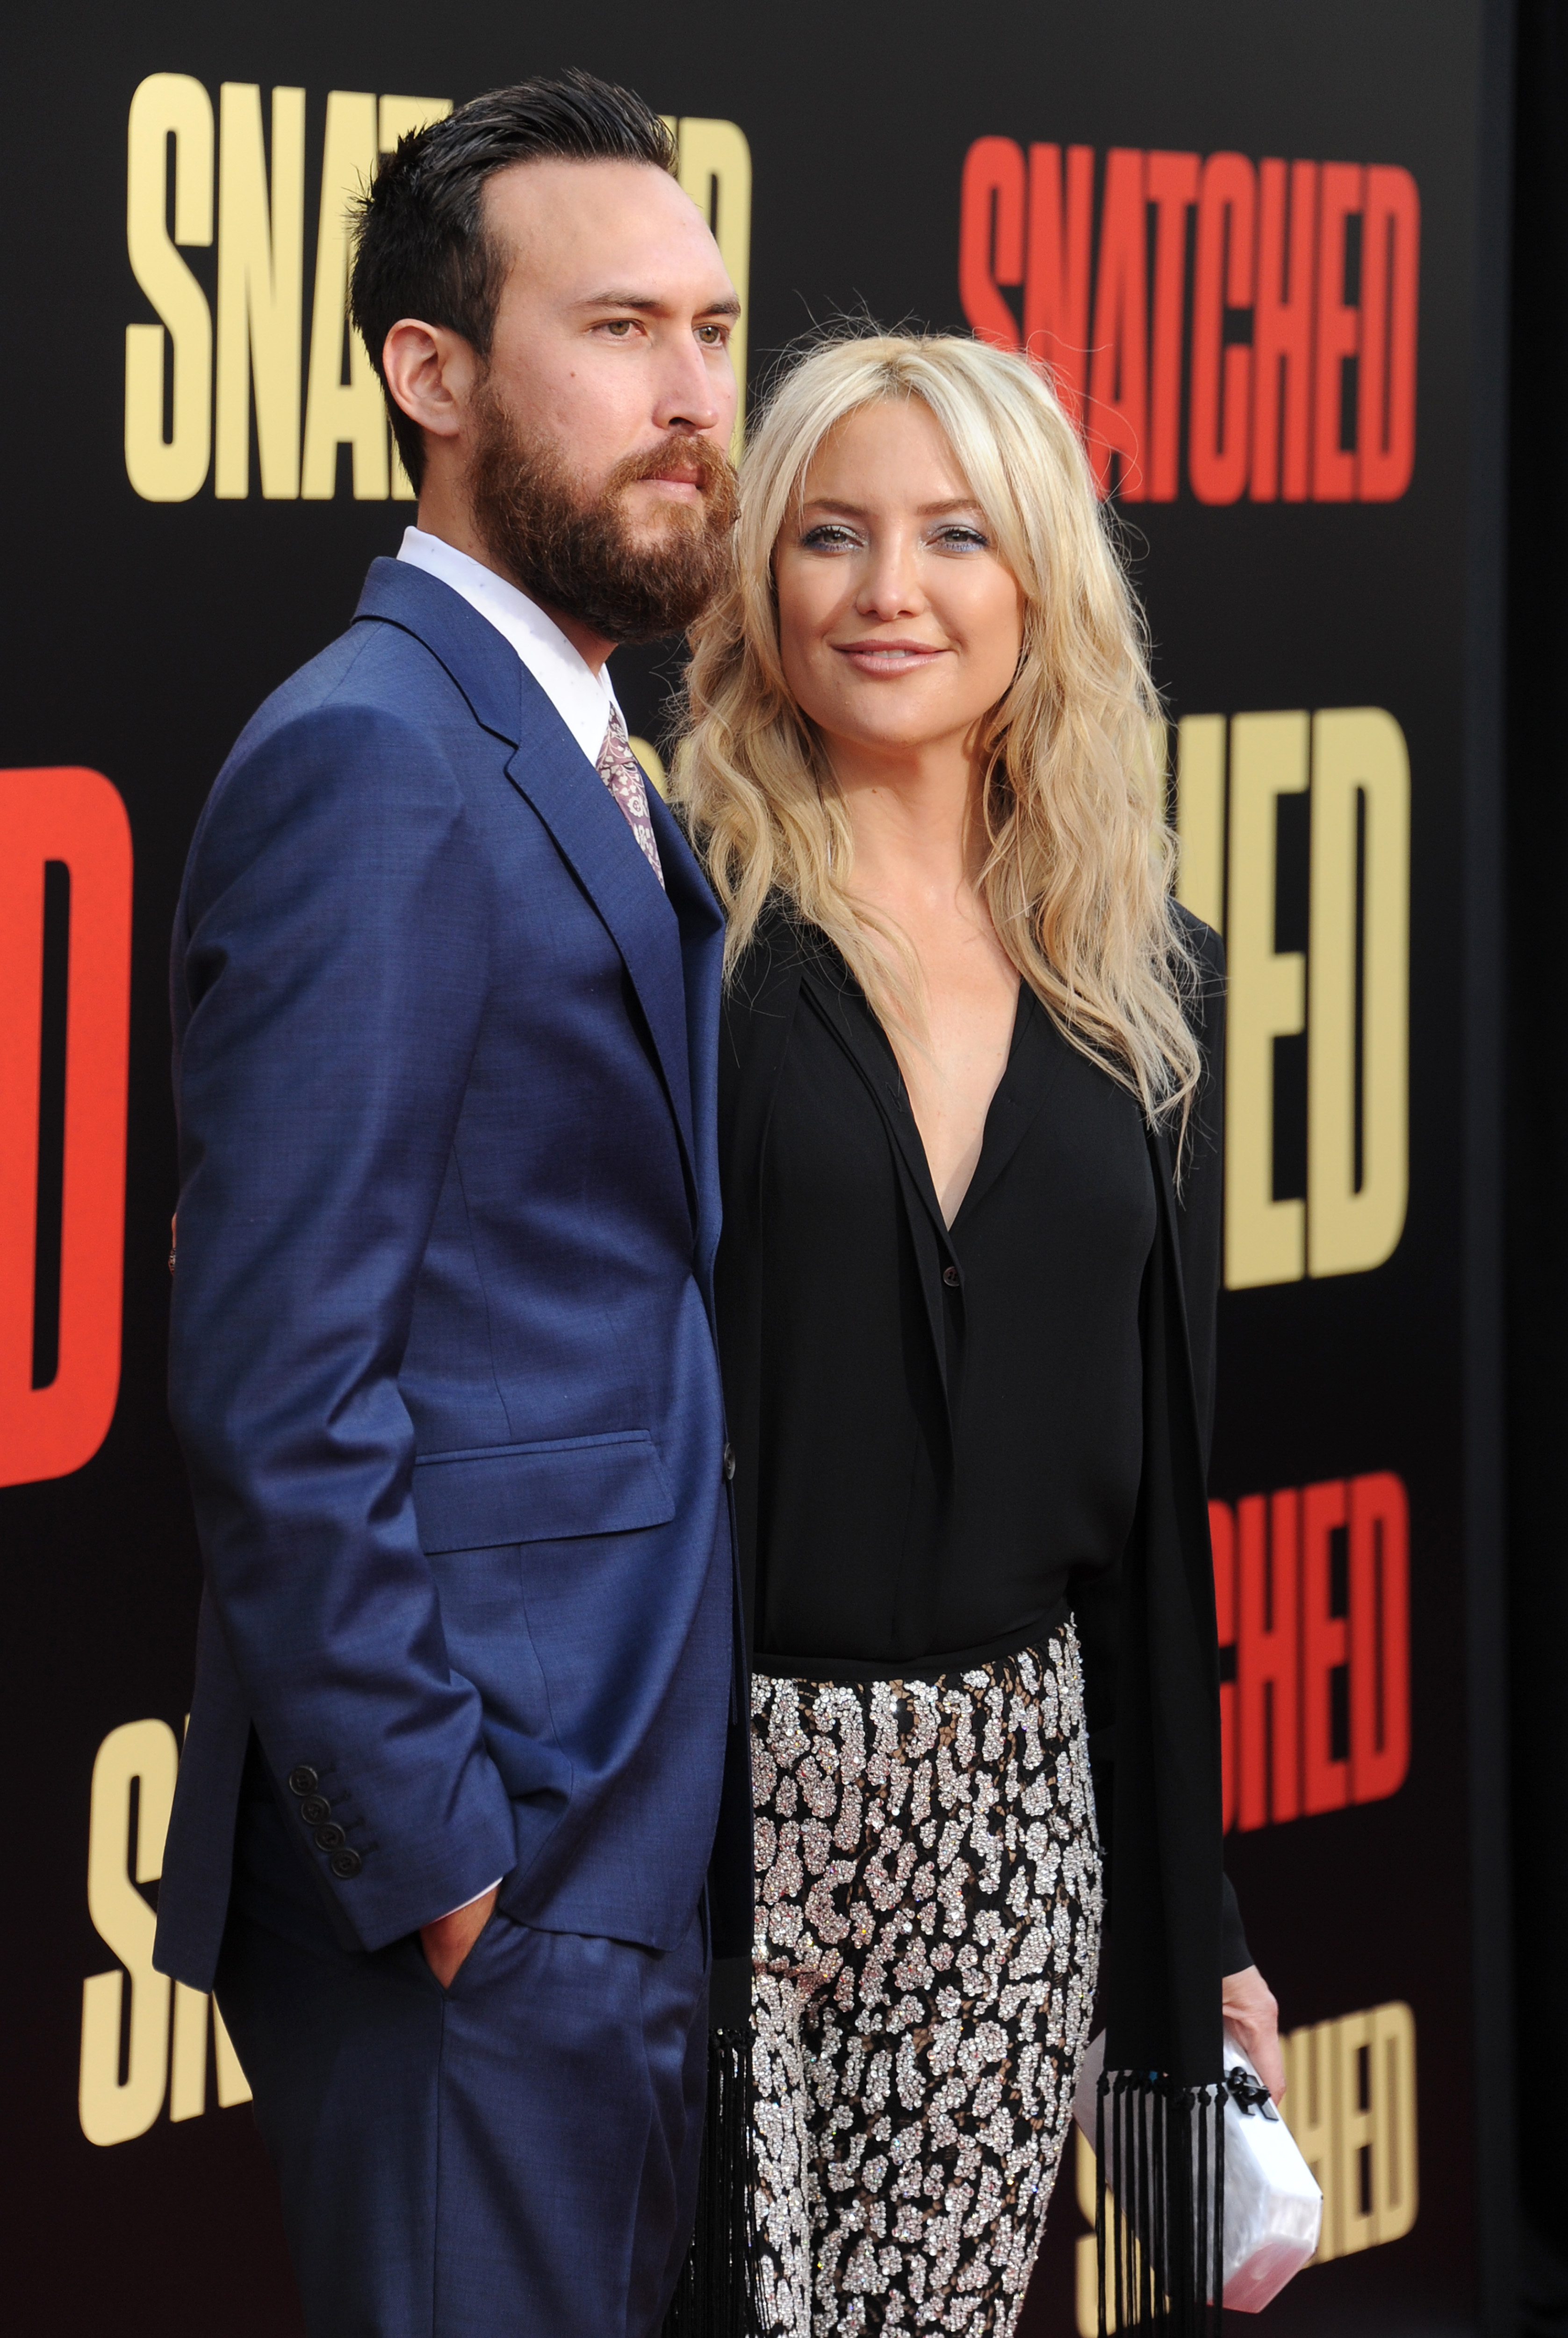 Kate Hudson and Danny Fujikawa during the premiere of 20th Century Fox's "Snatched" at Regency Village Theatre on May 10, 2017, in Westwood, California. | Source: Getty Images